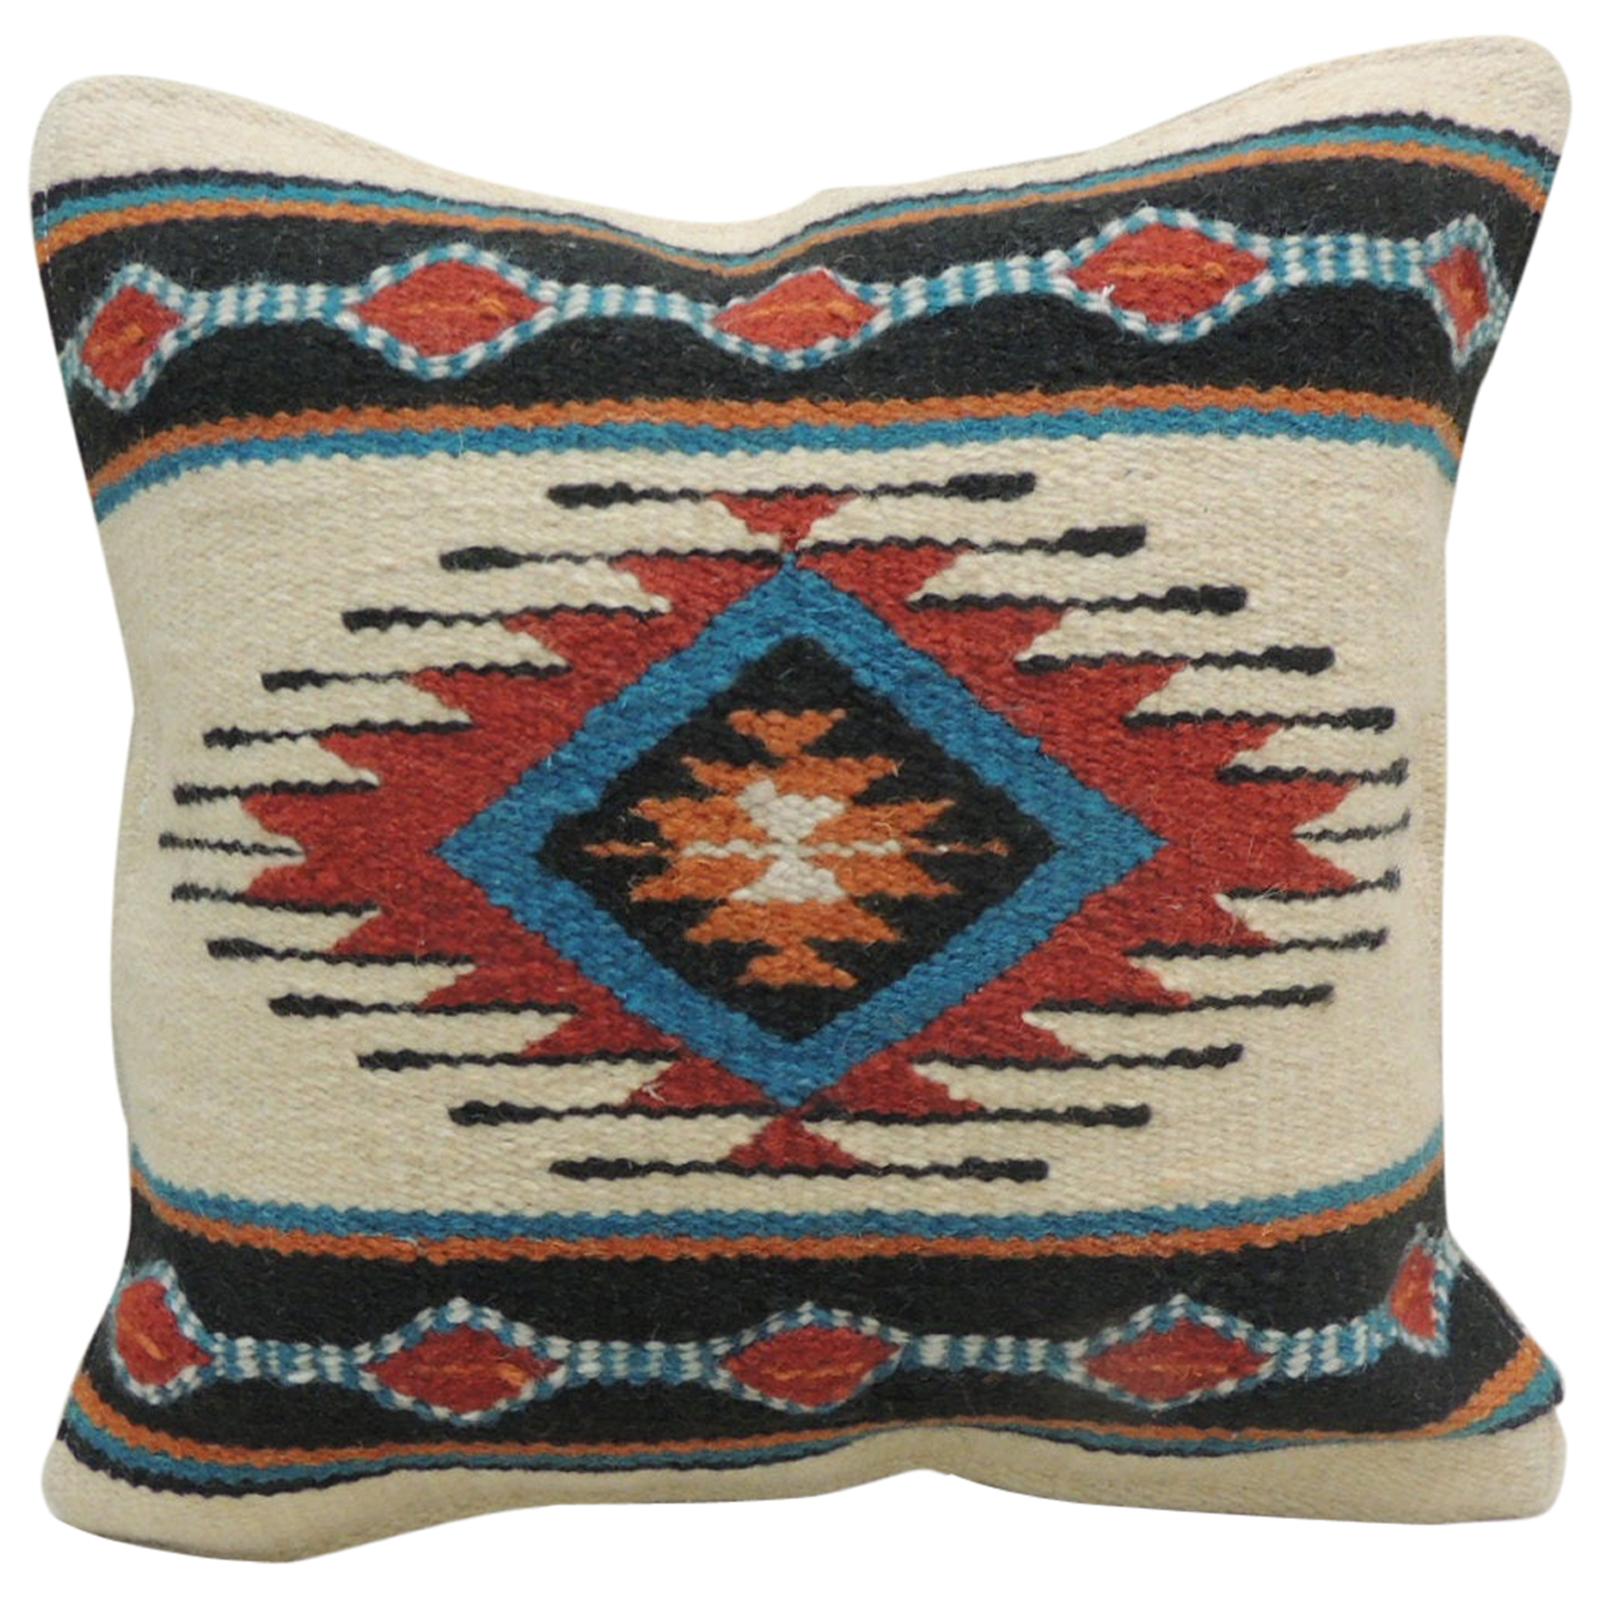 Vintage Red and Blue Navajo Style Woven Decorative Square Pillow